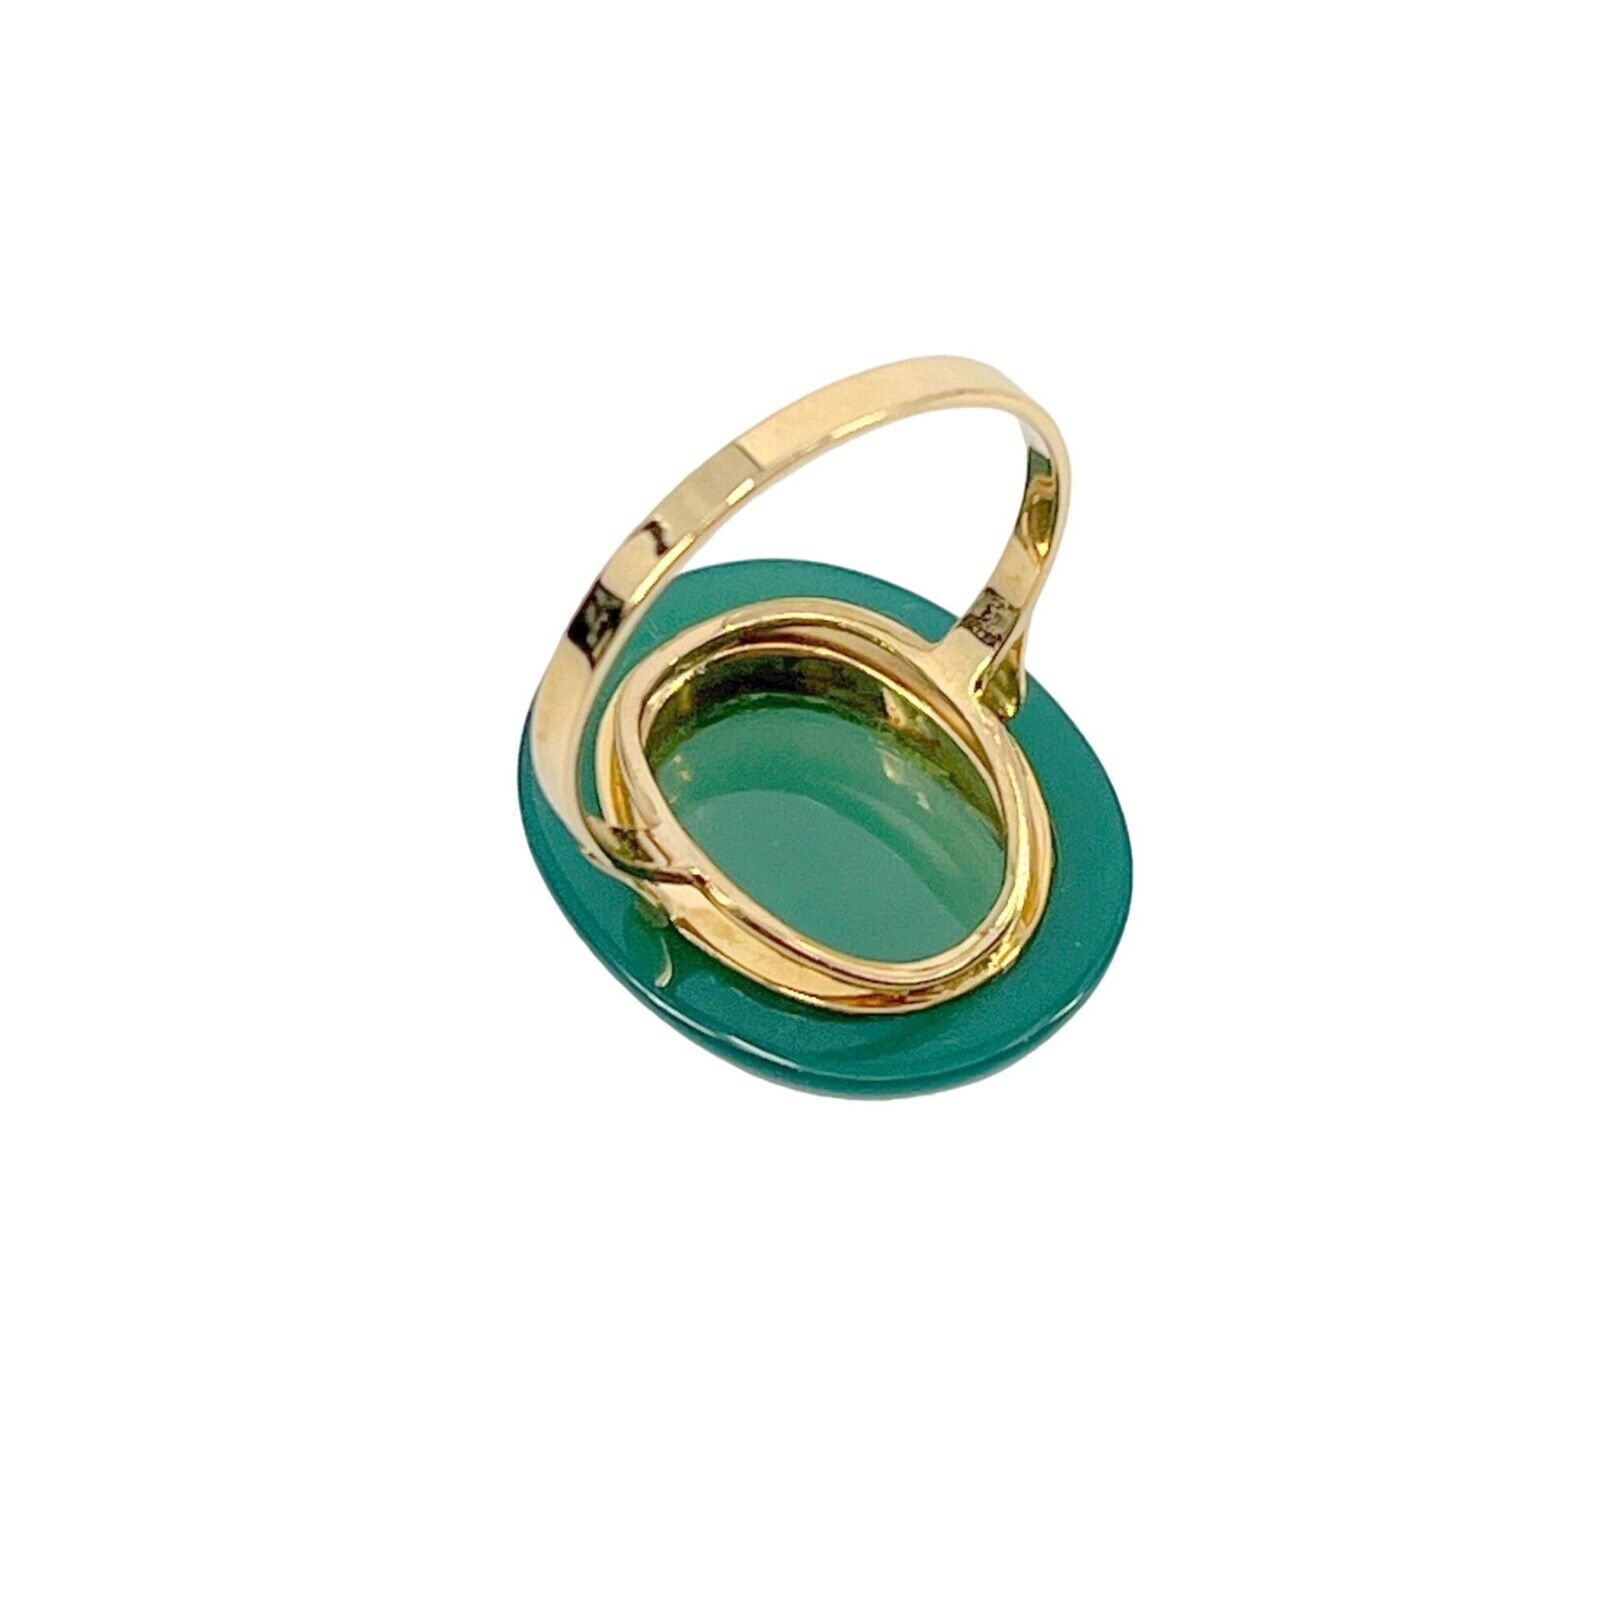 New Giovanni APA Green Agate Hand Carved Shell Cameo 18K Yellow Gold 750 Ring 6. Giovanni APA - фотография #5